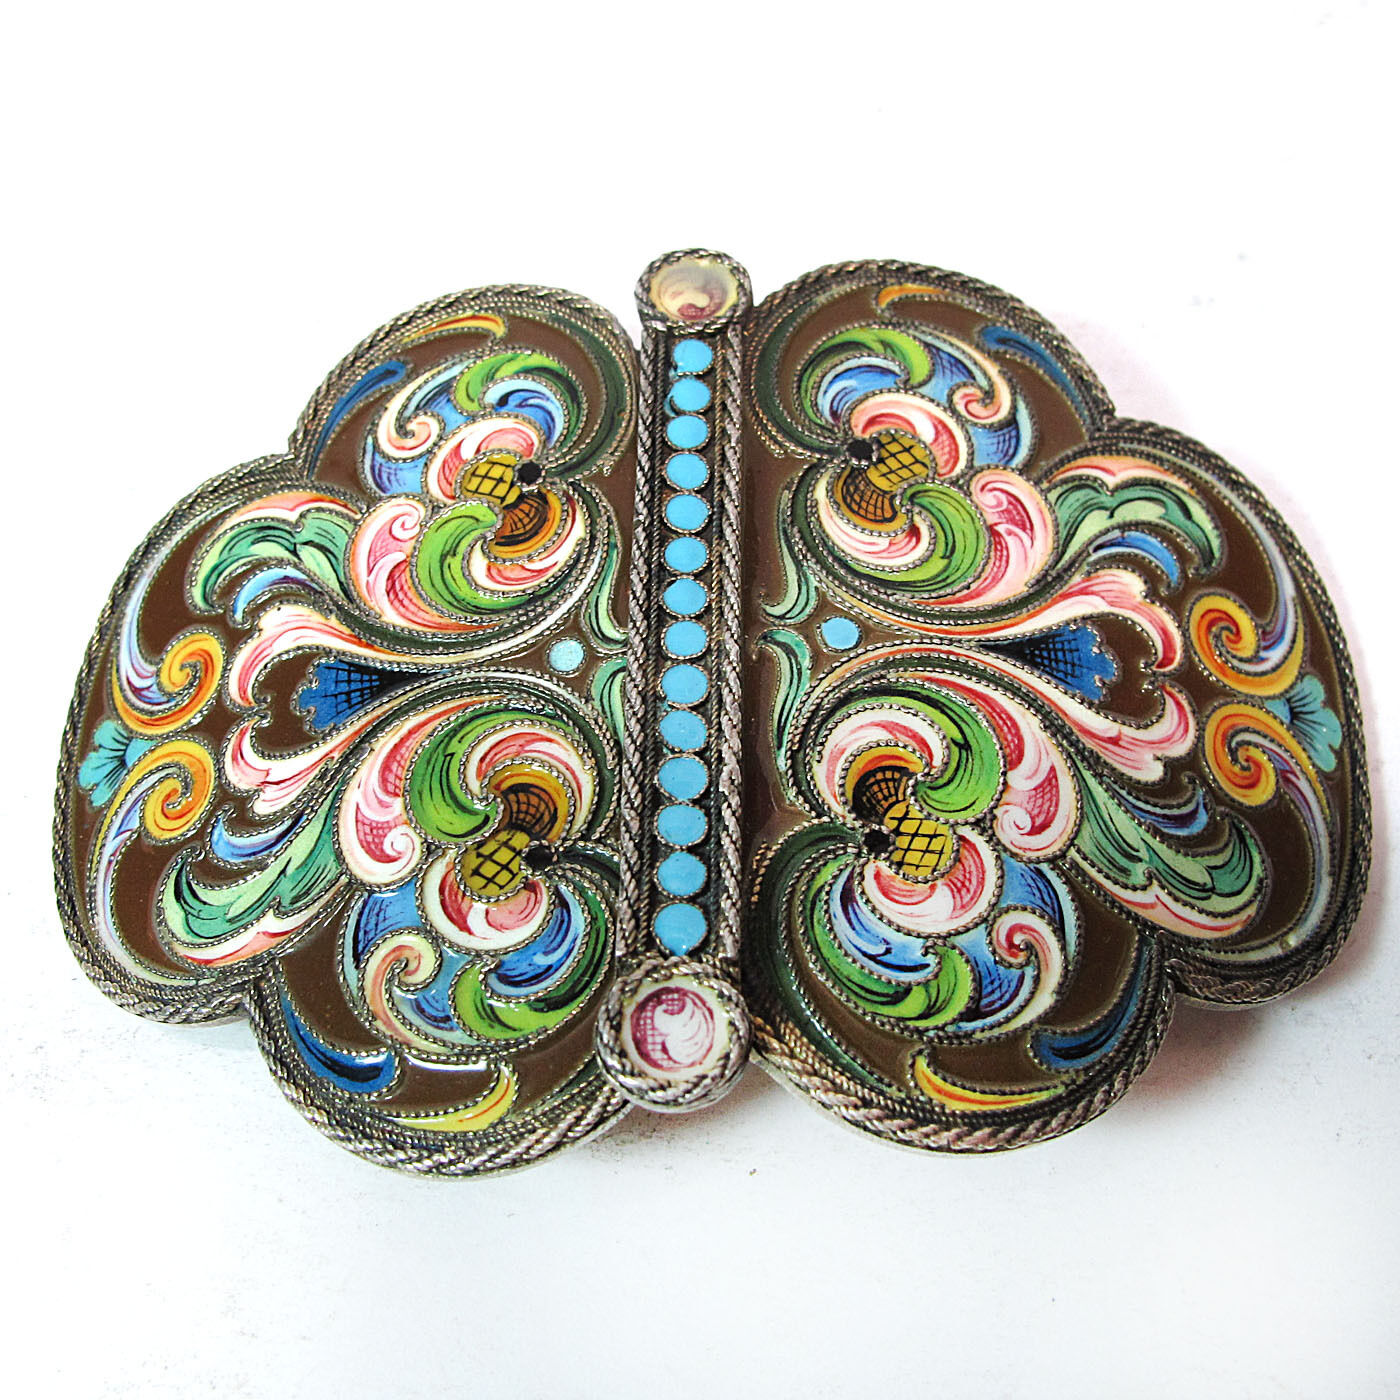 ANTIQUE RUSSIAN 84 SILVER SHADED ENAMEL BELT BUCKLE FABERGE QUALITY